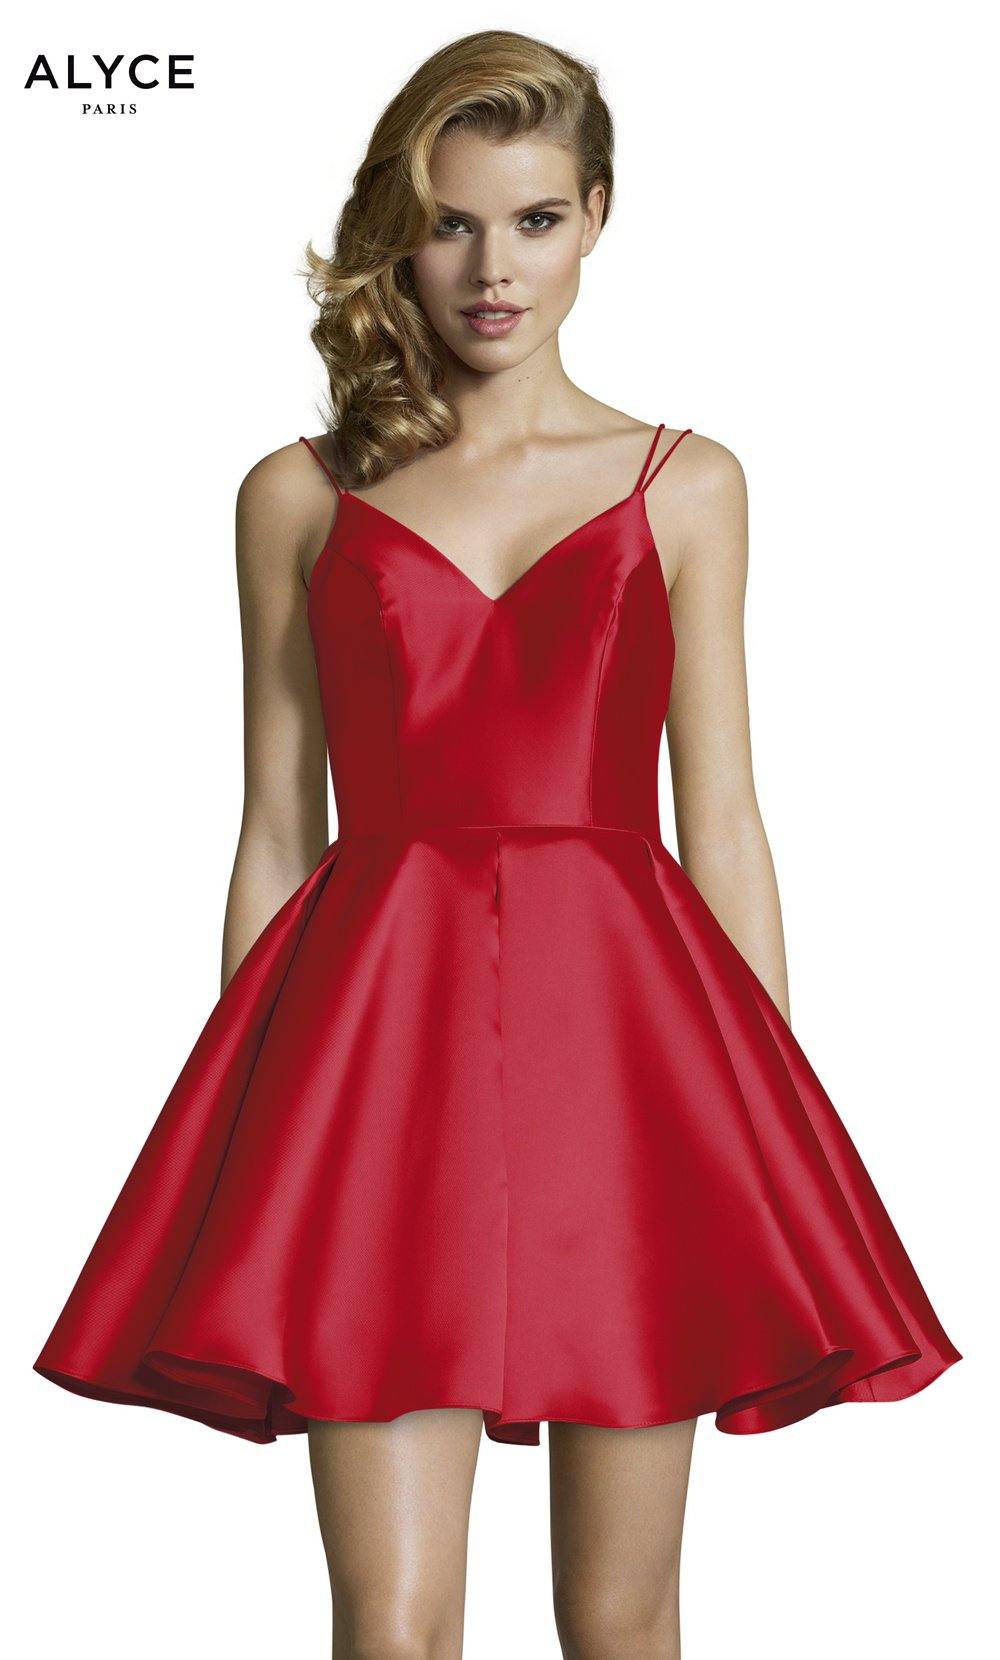 Short Red party dress with a v neckline, pockets, and a mikado fabrication. SWATCH_3764__RED